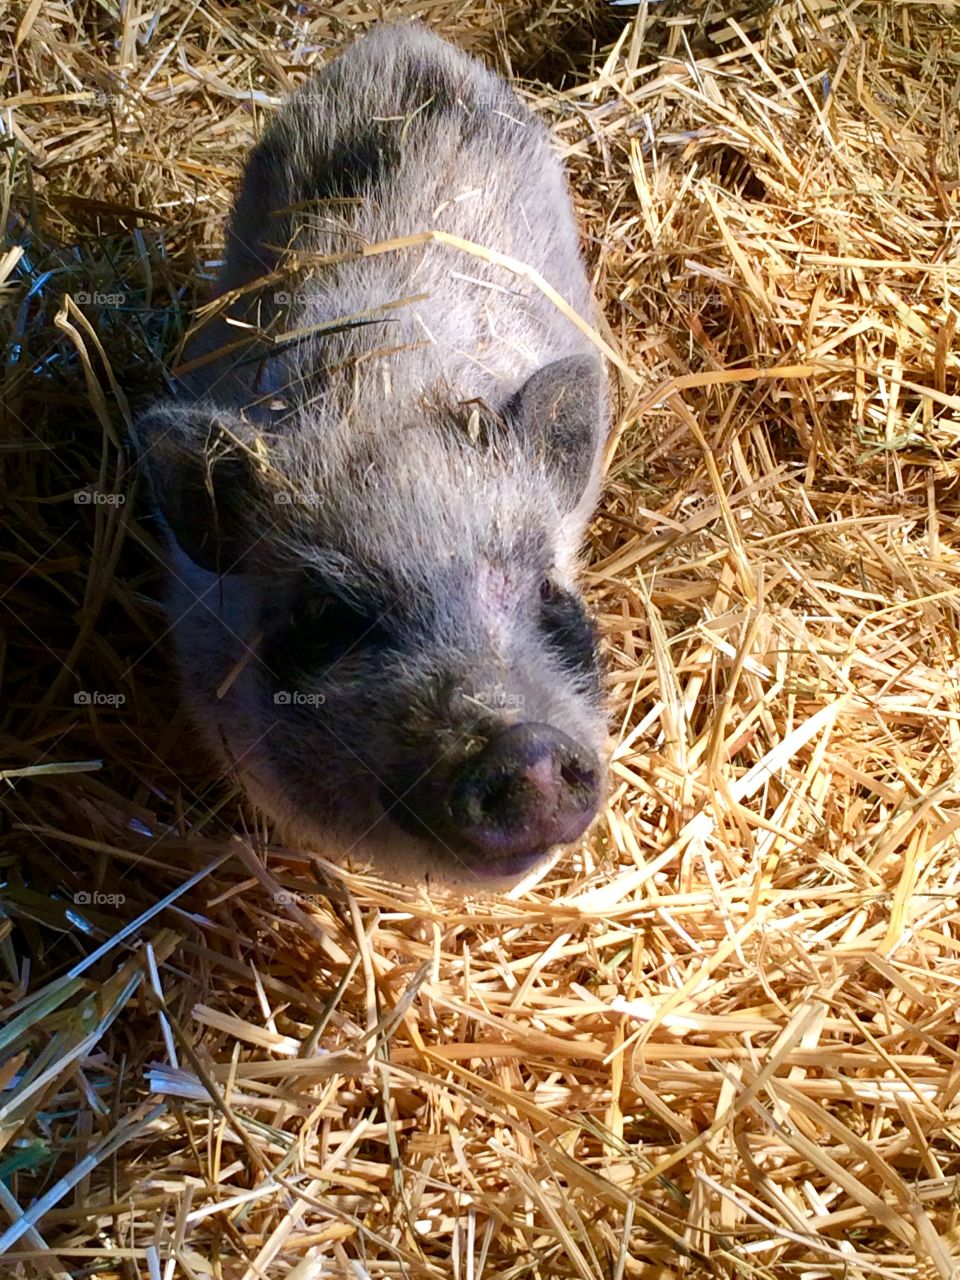 This little guy paused in his romping in the hay to pink indignantly as I interrupted to take his picture.